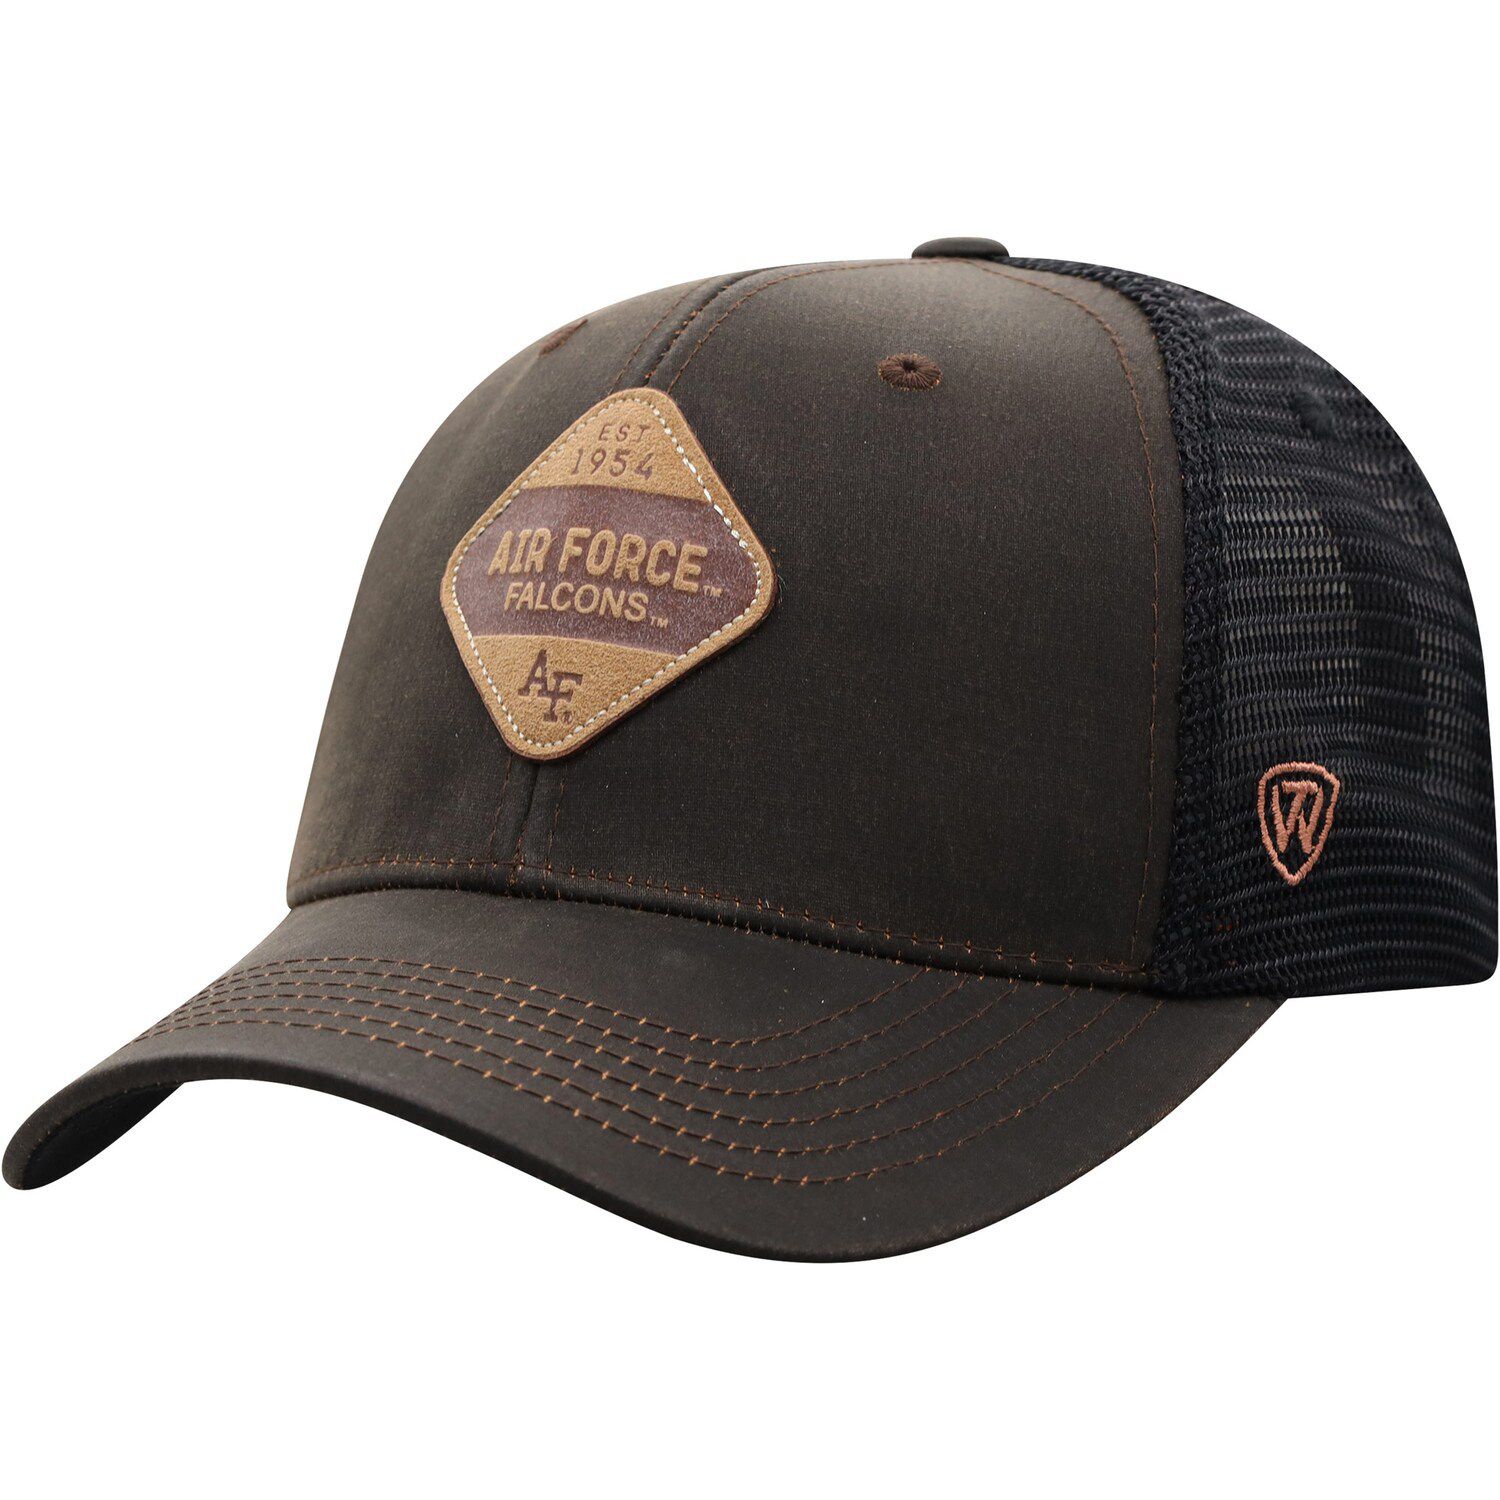 Image for Unbranded Men's Top of the World Brown/Black Air Force Falcons Elm Trucker Snapback Hat at Kohl's.